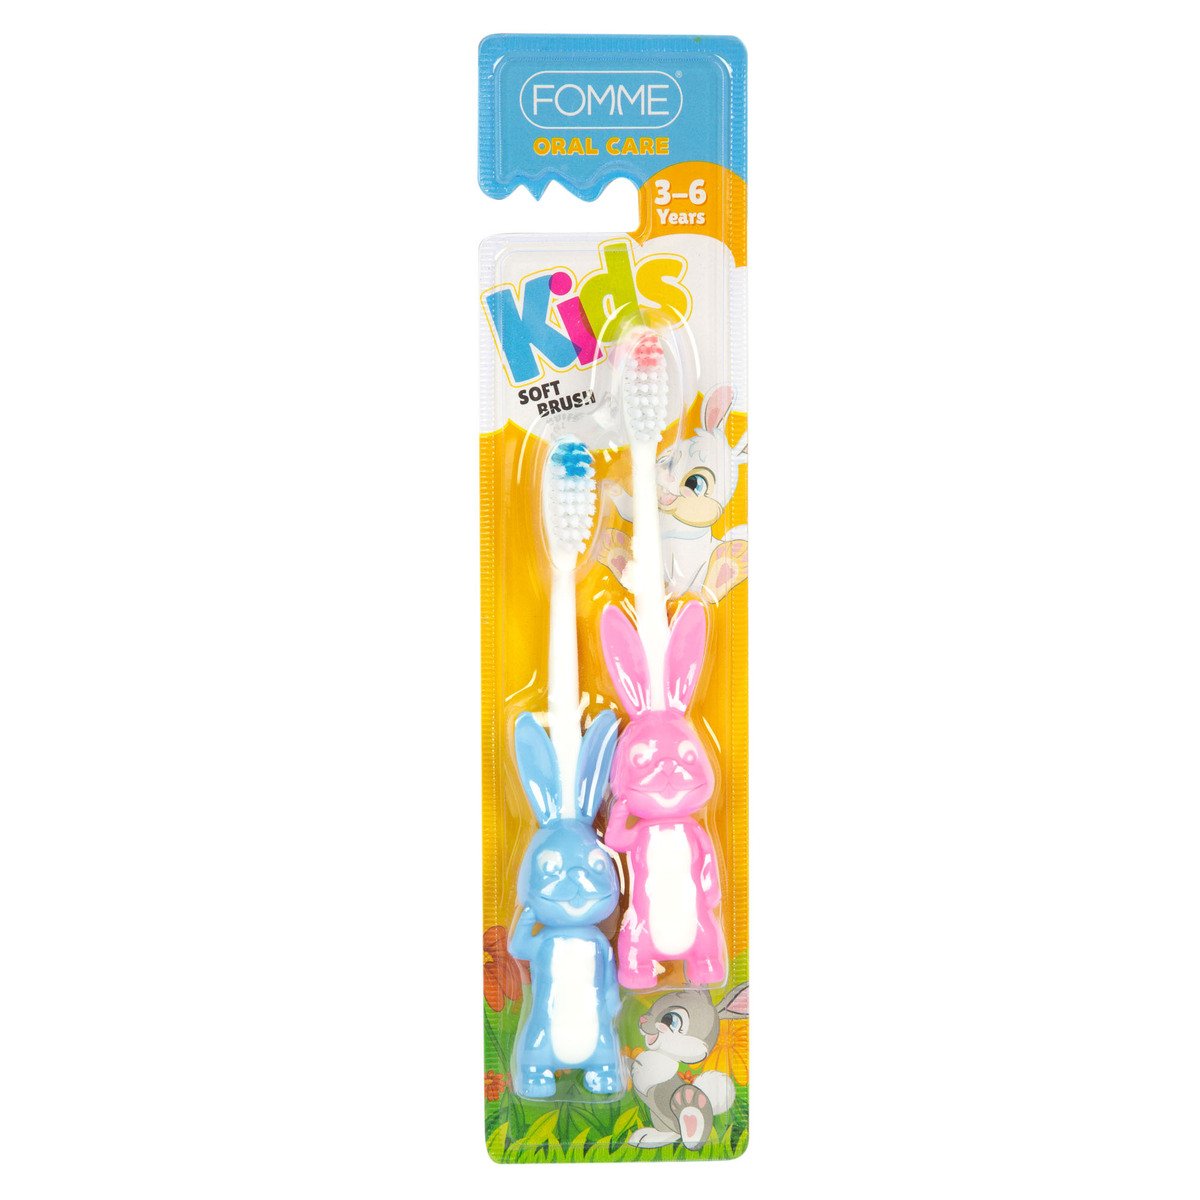 Fomme Oral Care Soft Kids Toothbrush For 3-6 Years 2 pcs